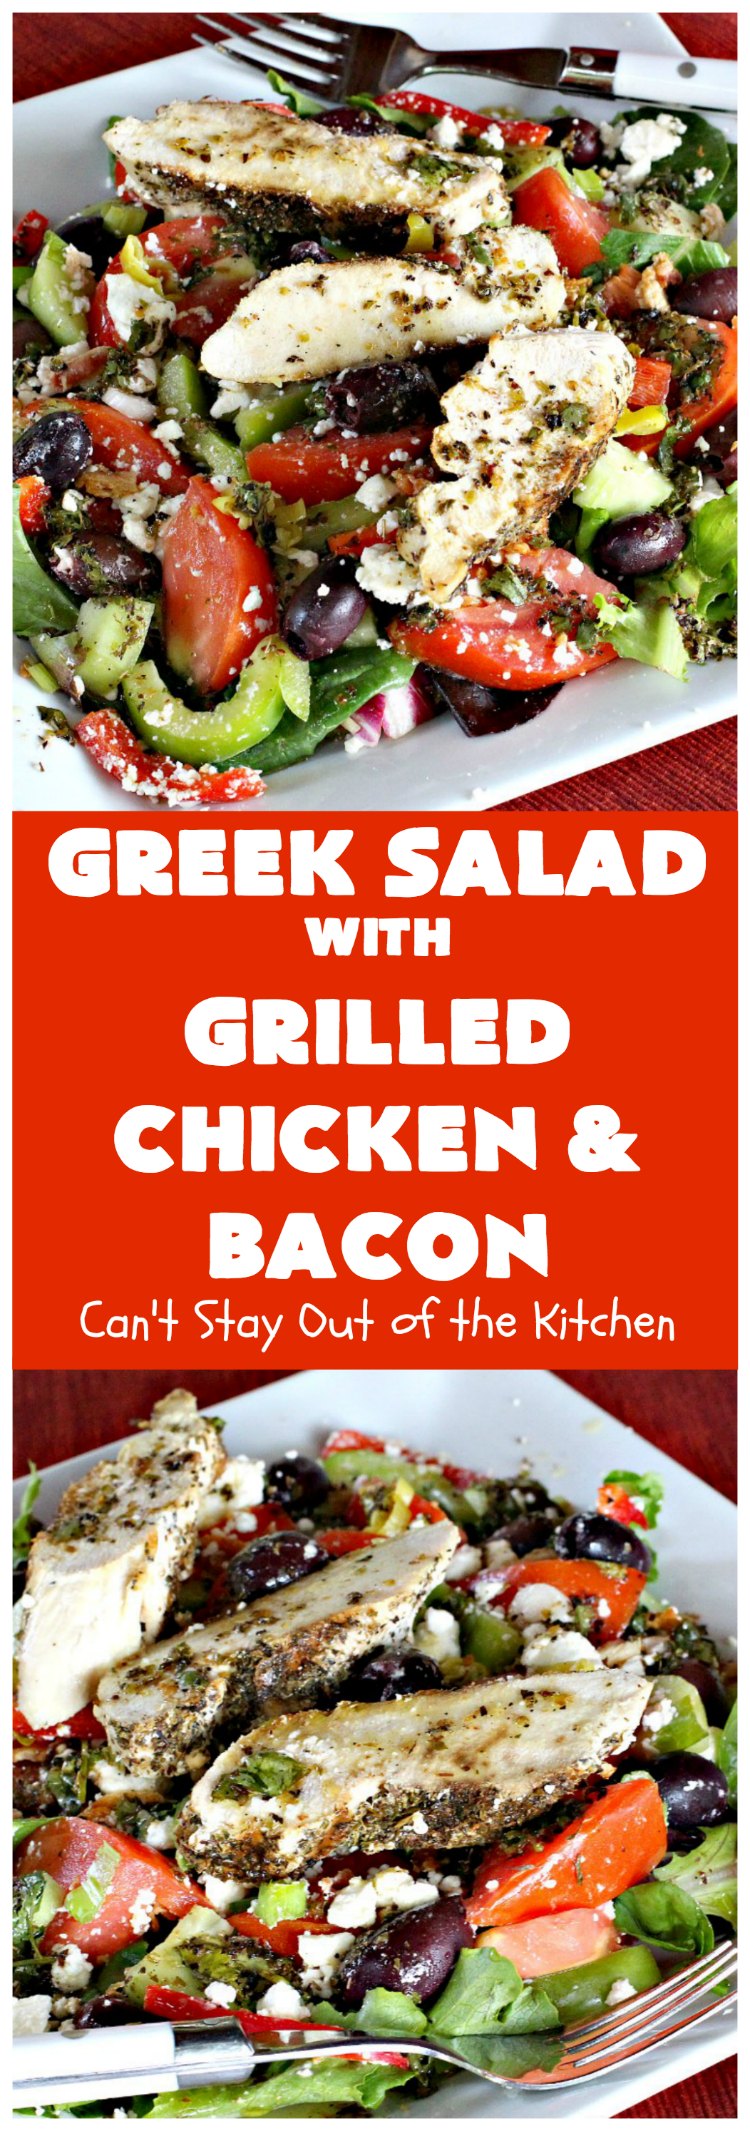 Greek Salad with Grilled Chicken and Bacon | Can't Stay Out of the Kitchen